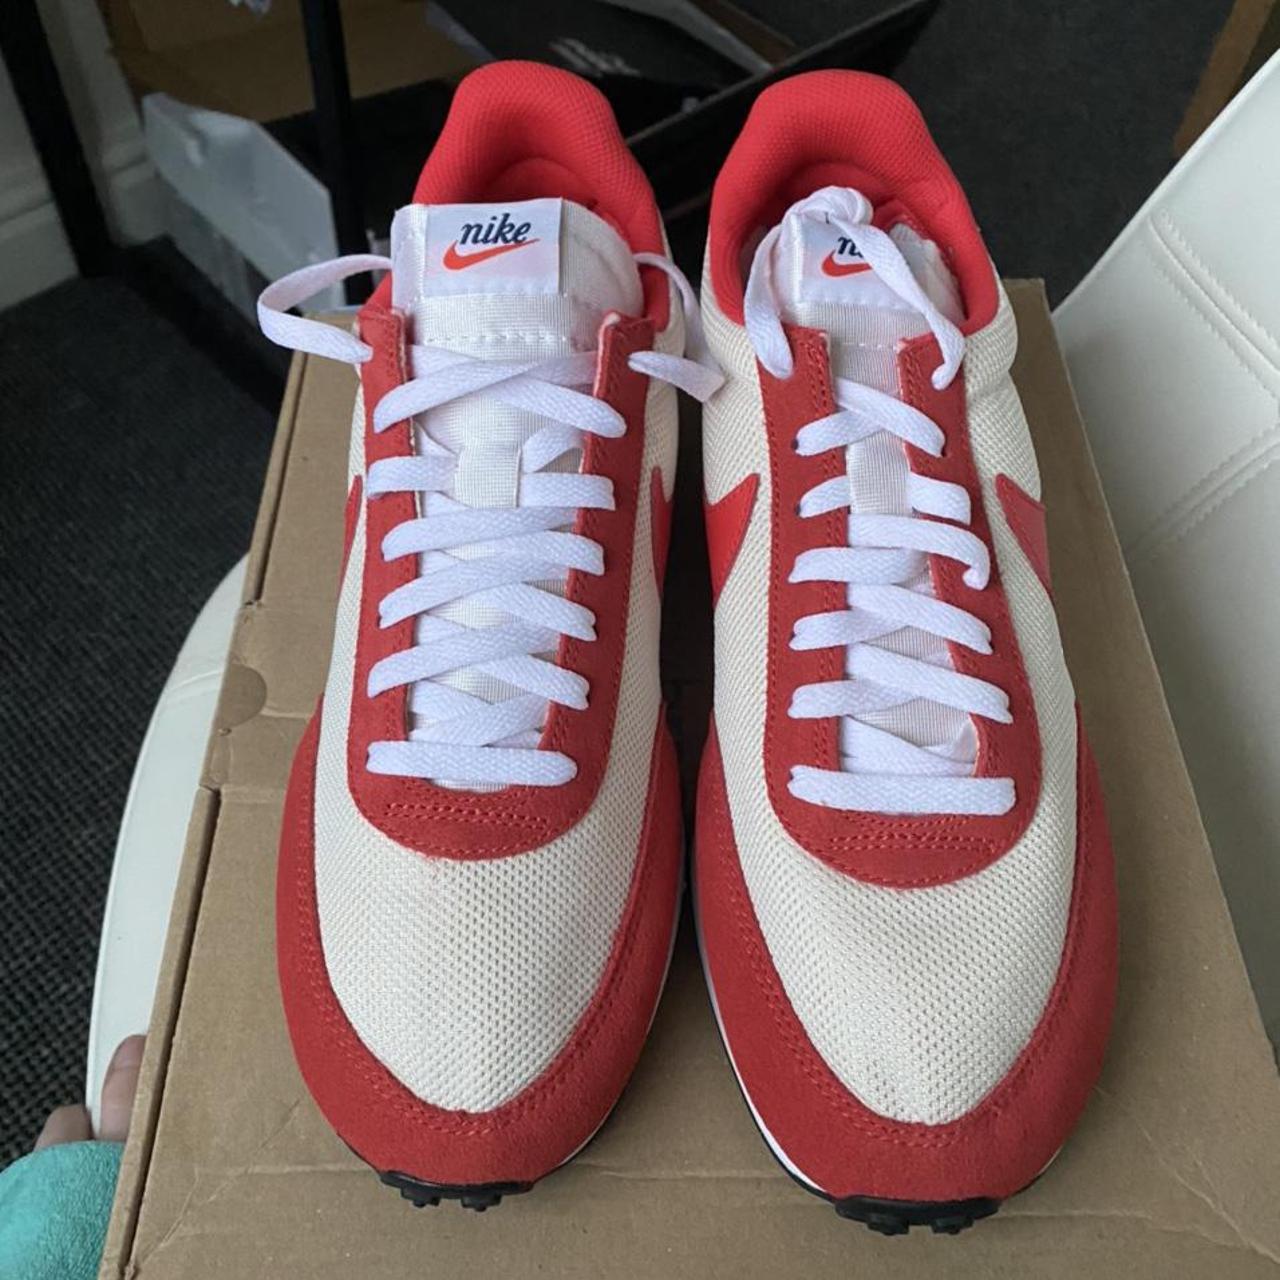 Nike trainers, never worn, brand new in box. Selling... - Depop